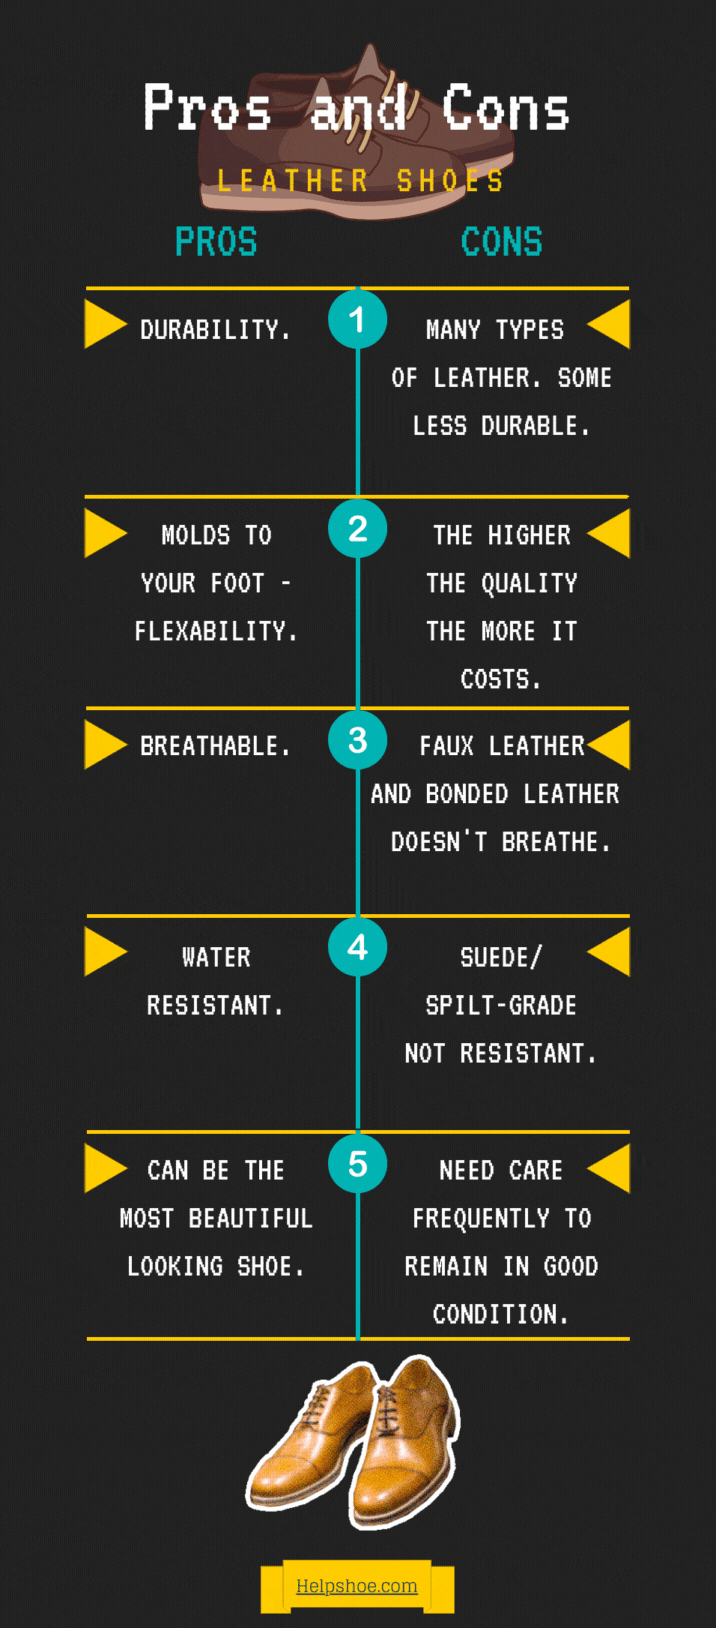 Pros and Cons of leather shoes